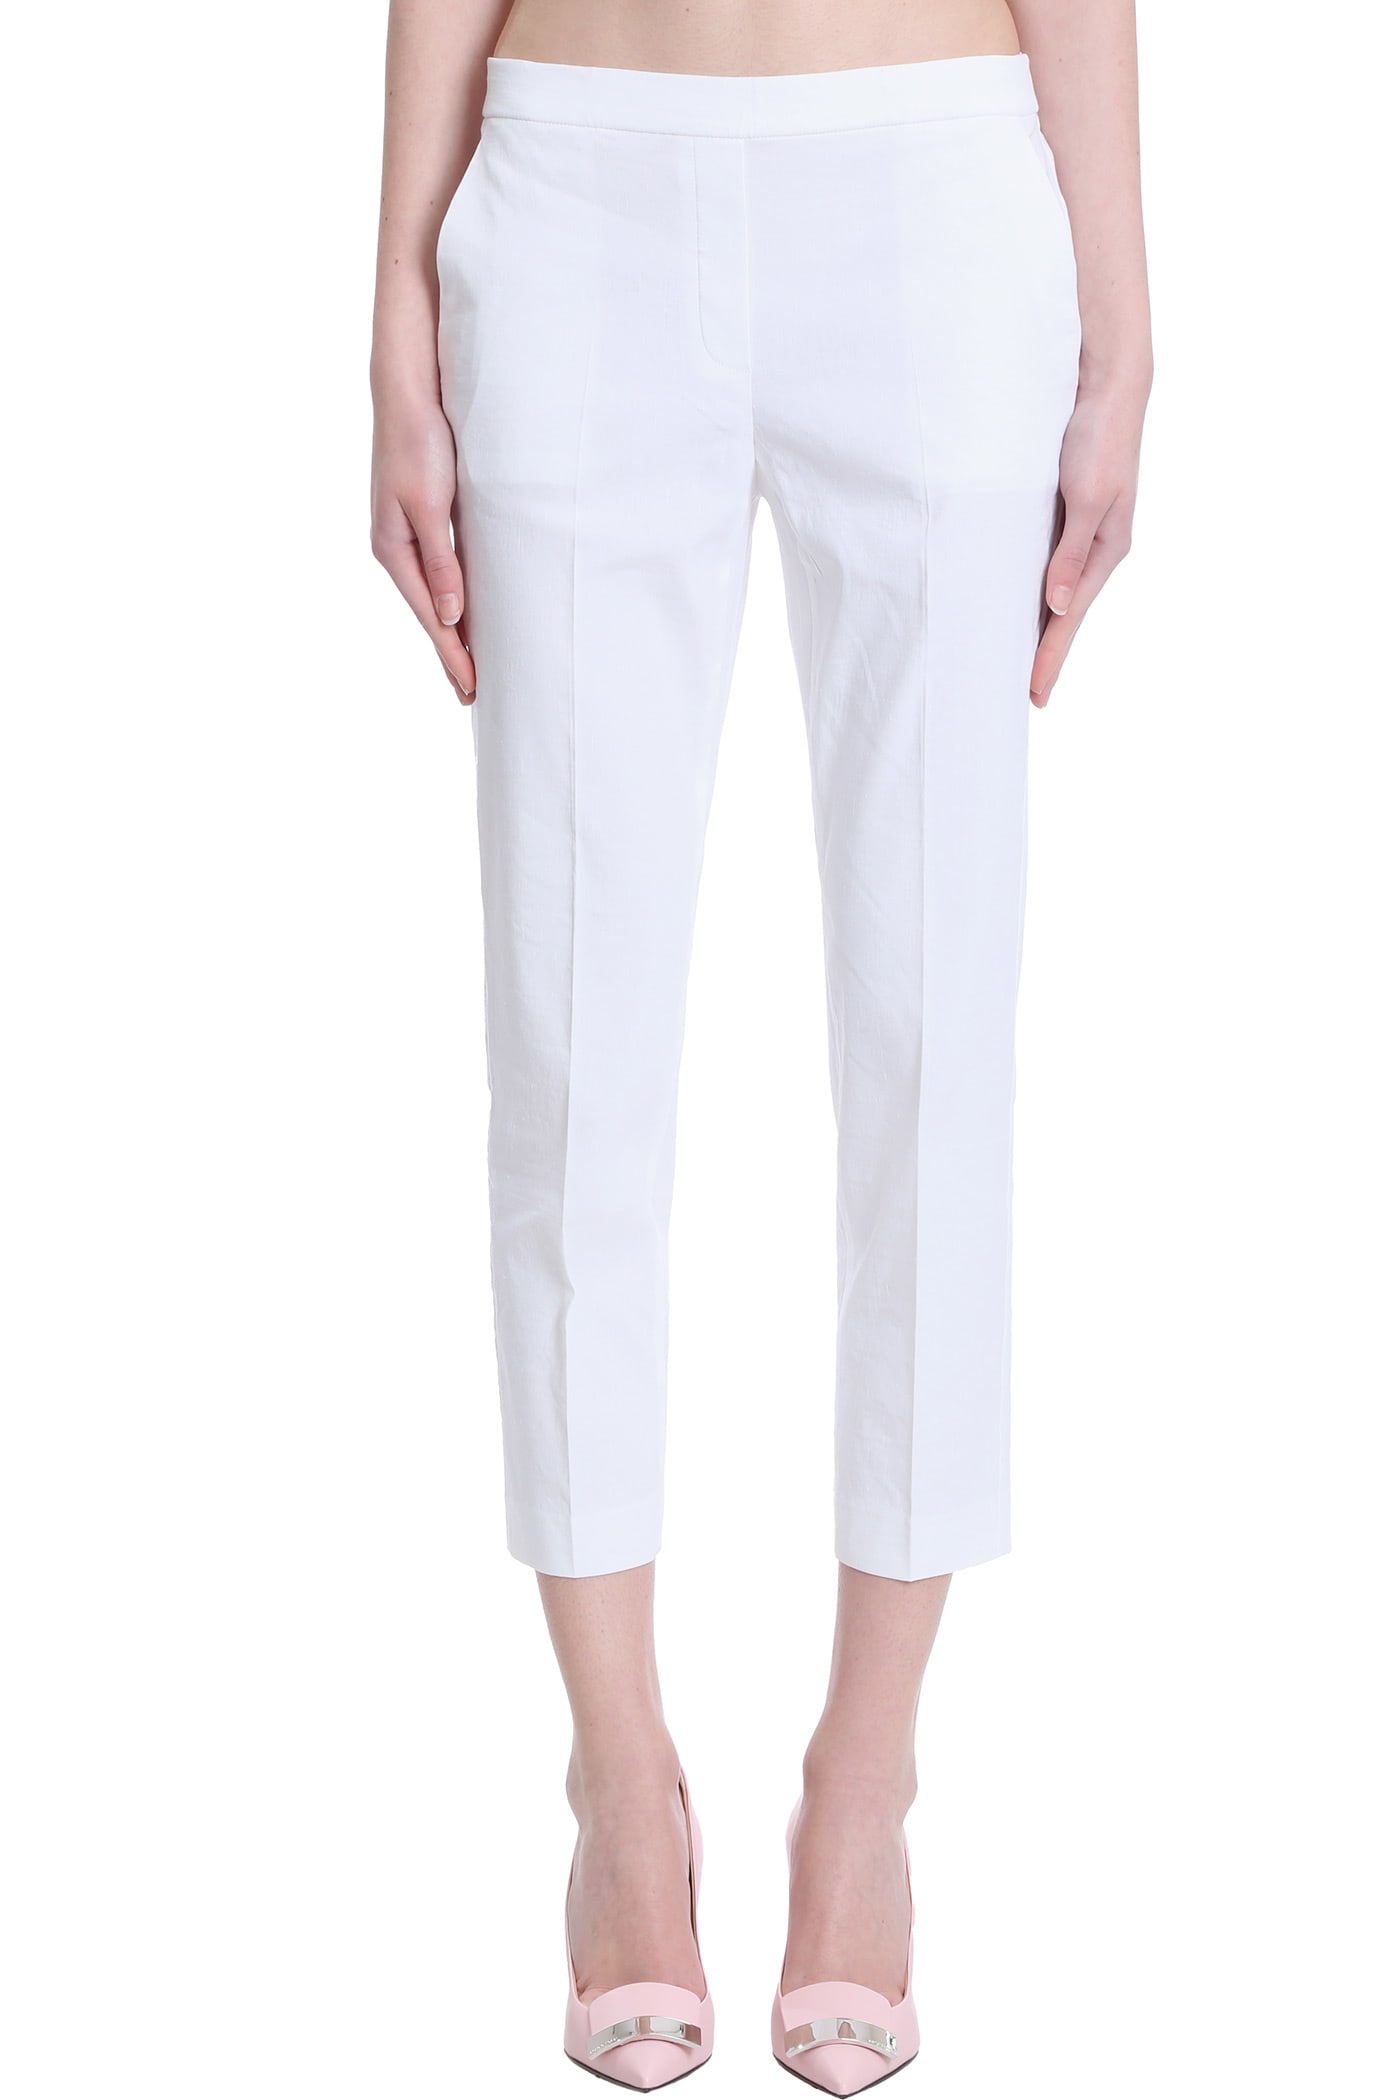 THEORY trousers IN WHITE LINEN,K0203201100